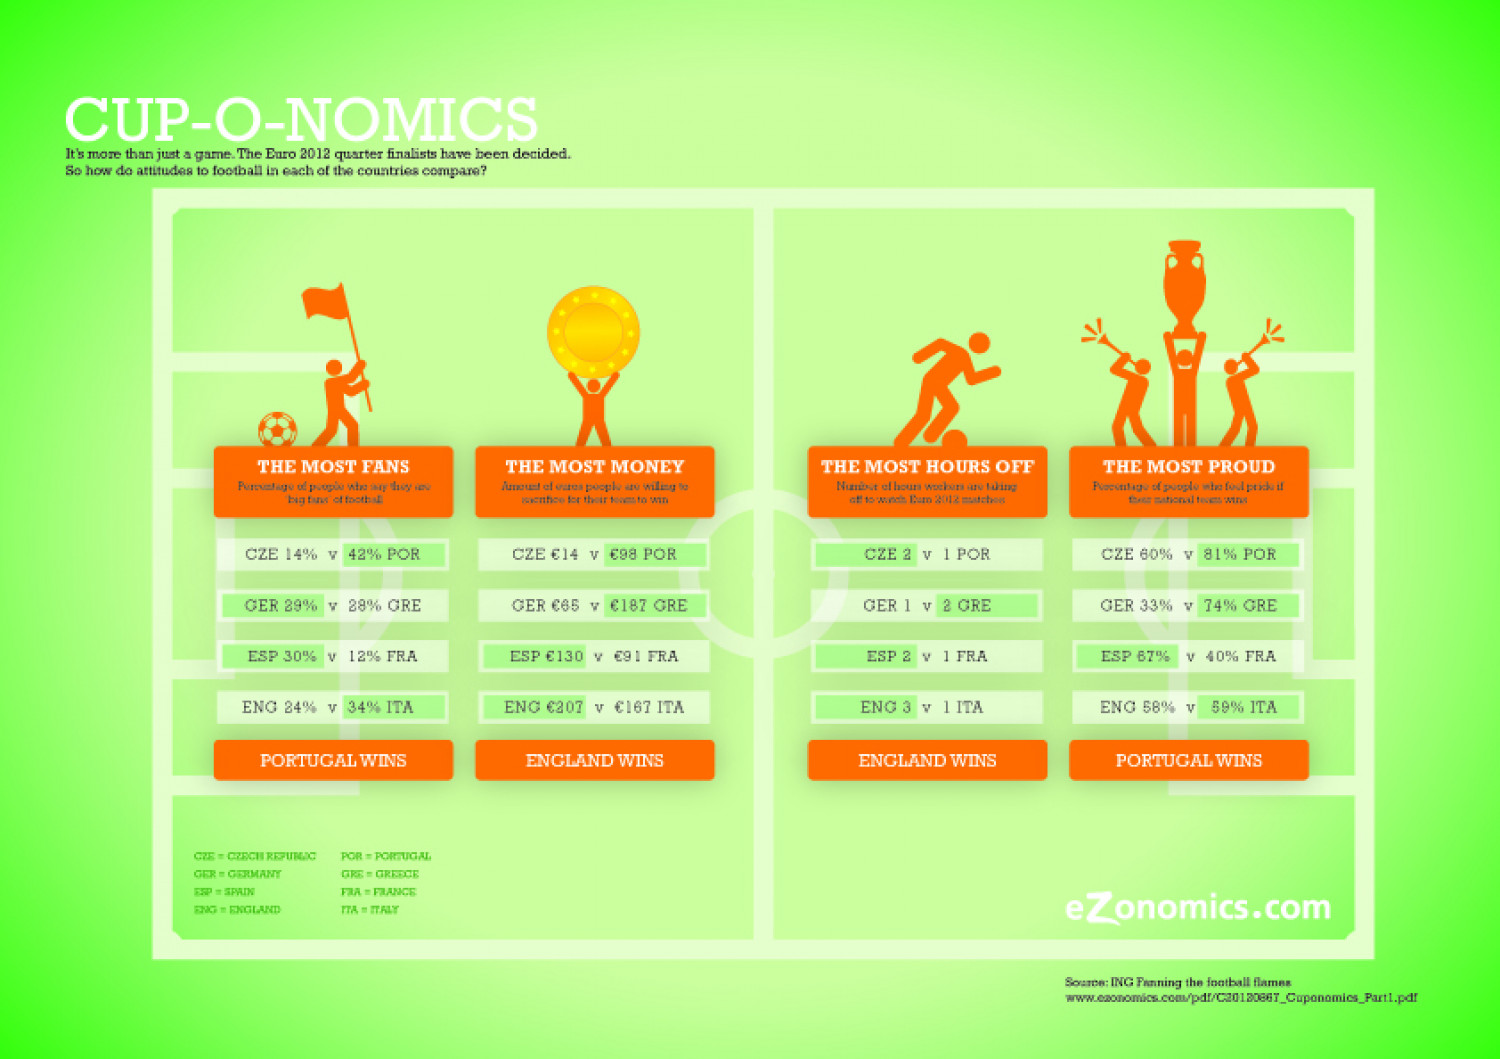 Cup-o-nomics: Attitudes to football in the Euro 2012 quarter-finalist countries Infographic